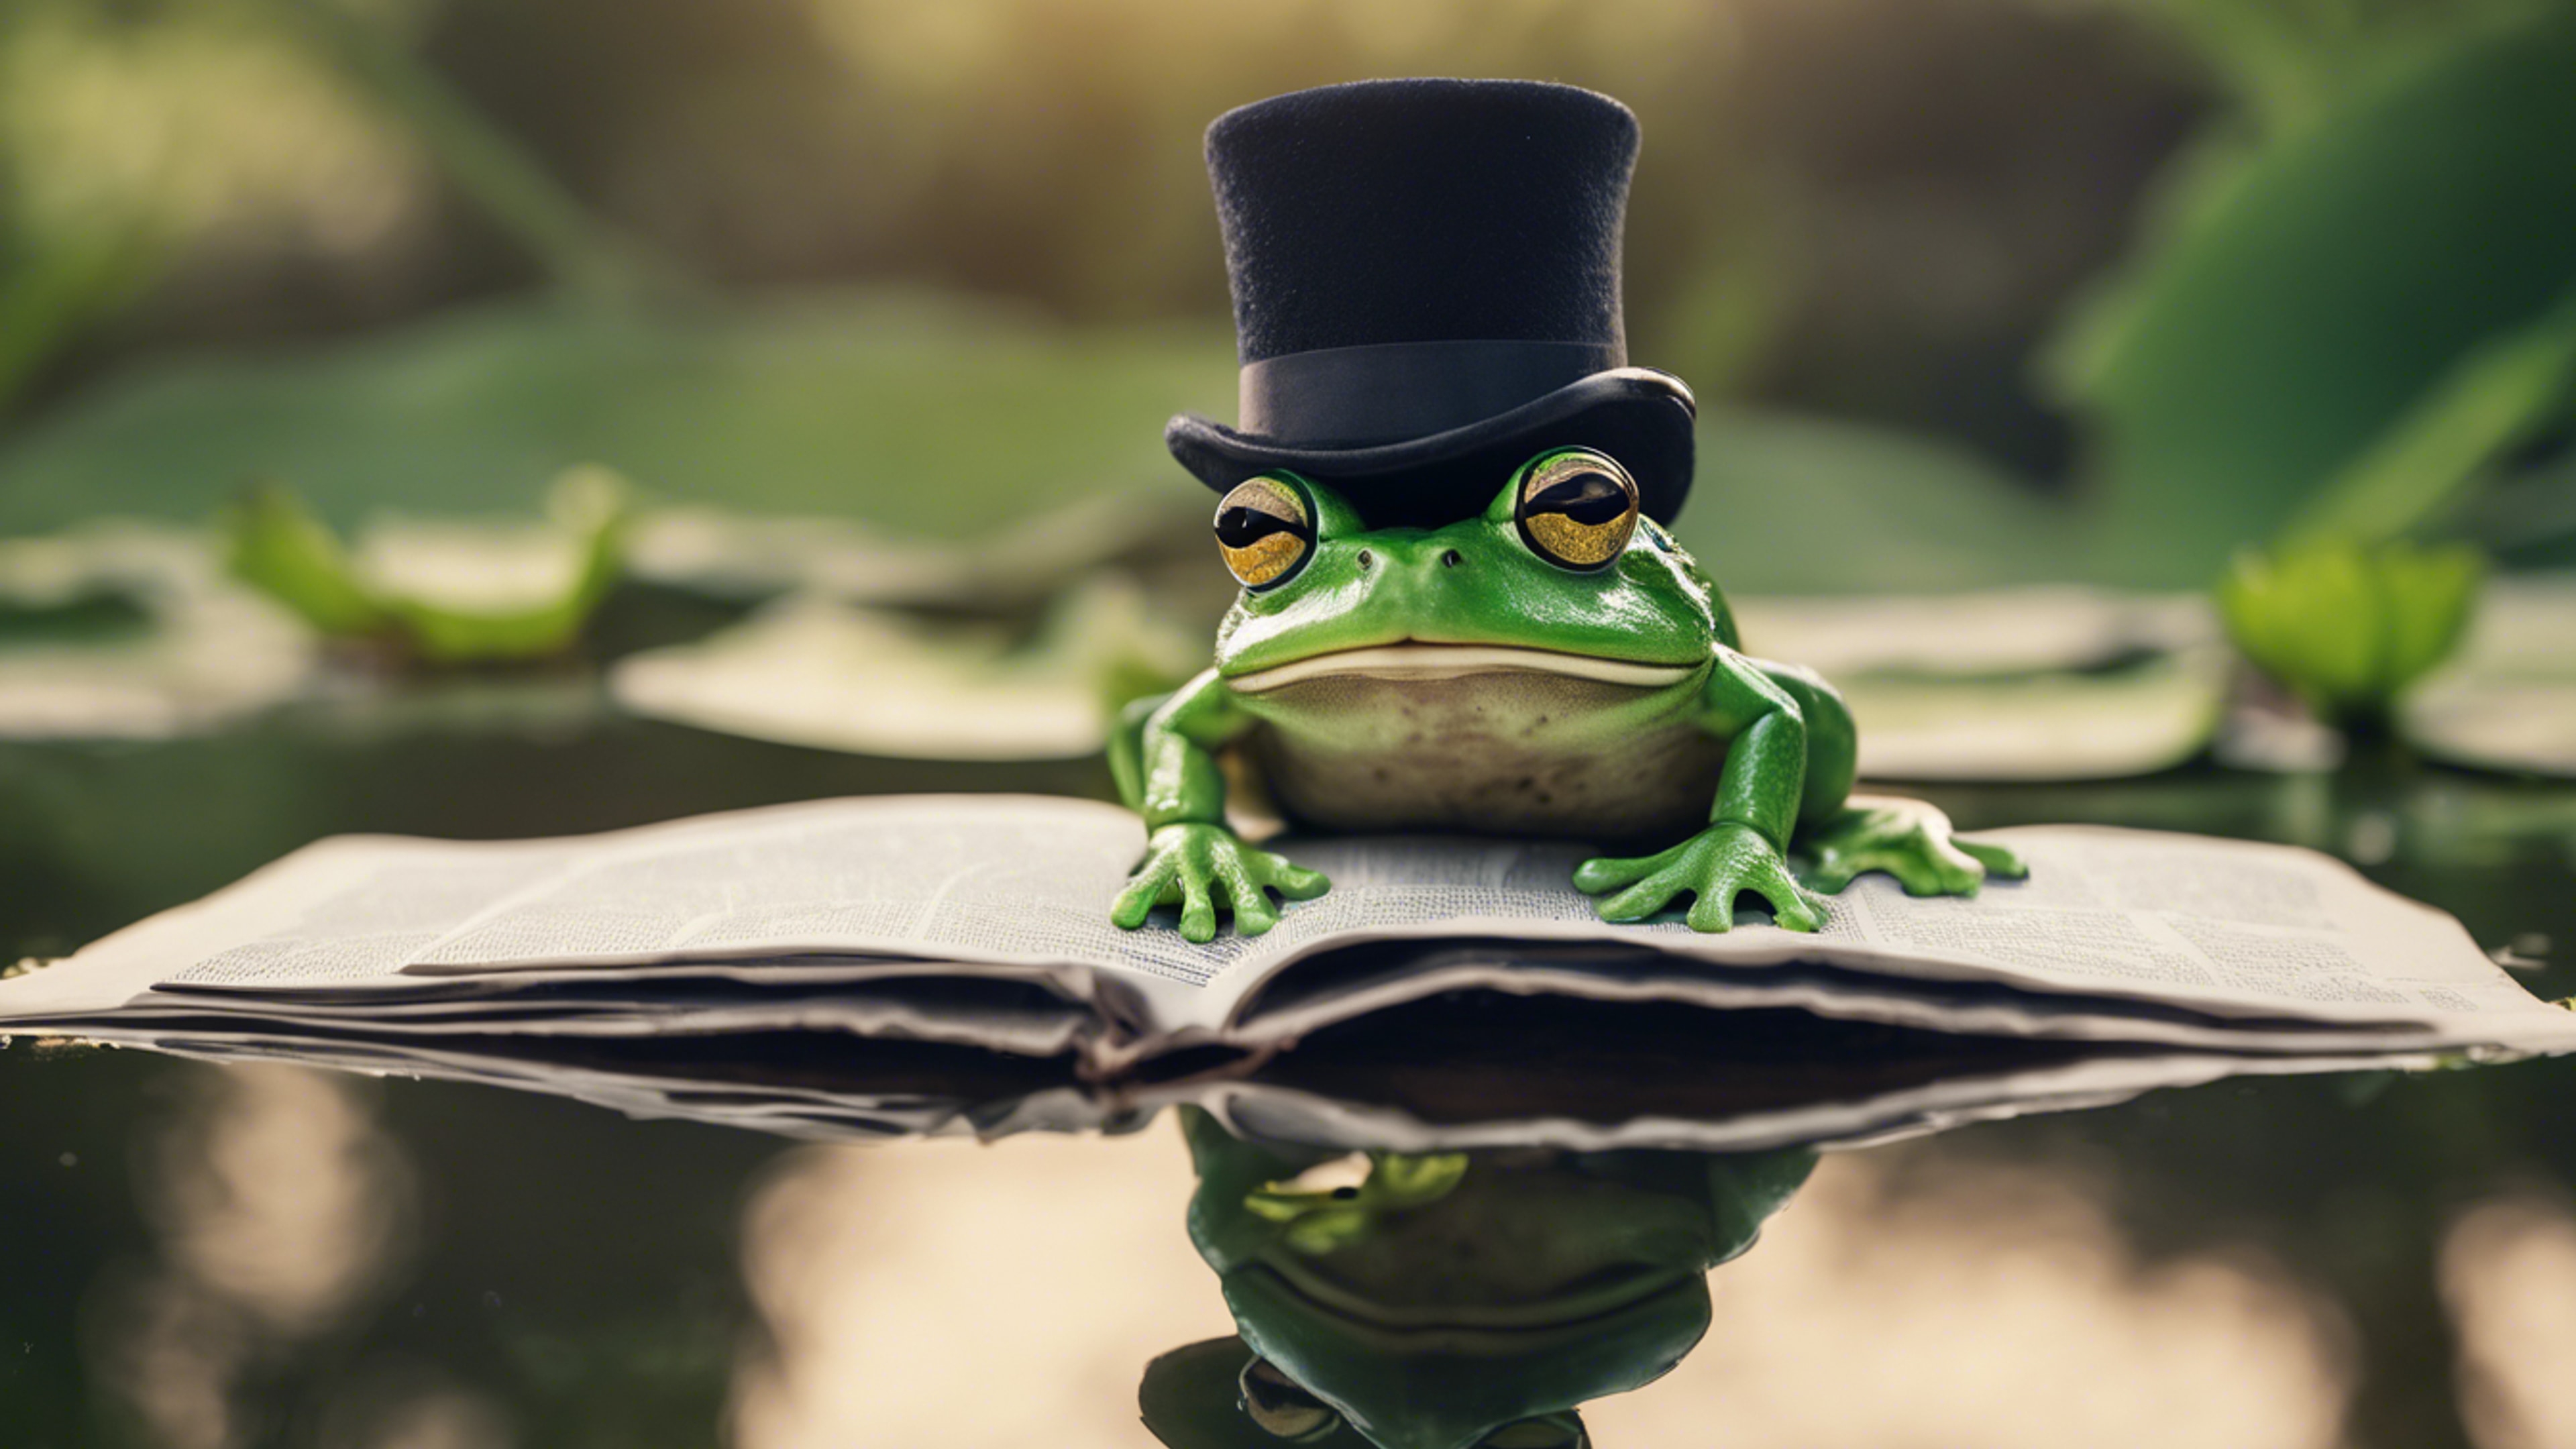 A frog in a top hat and monocle reading a newspaper on a lily pad. Tapet[b0ddd333718f414da74f]